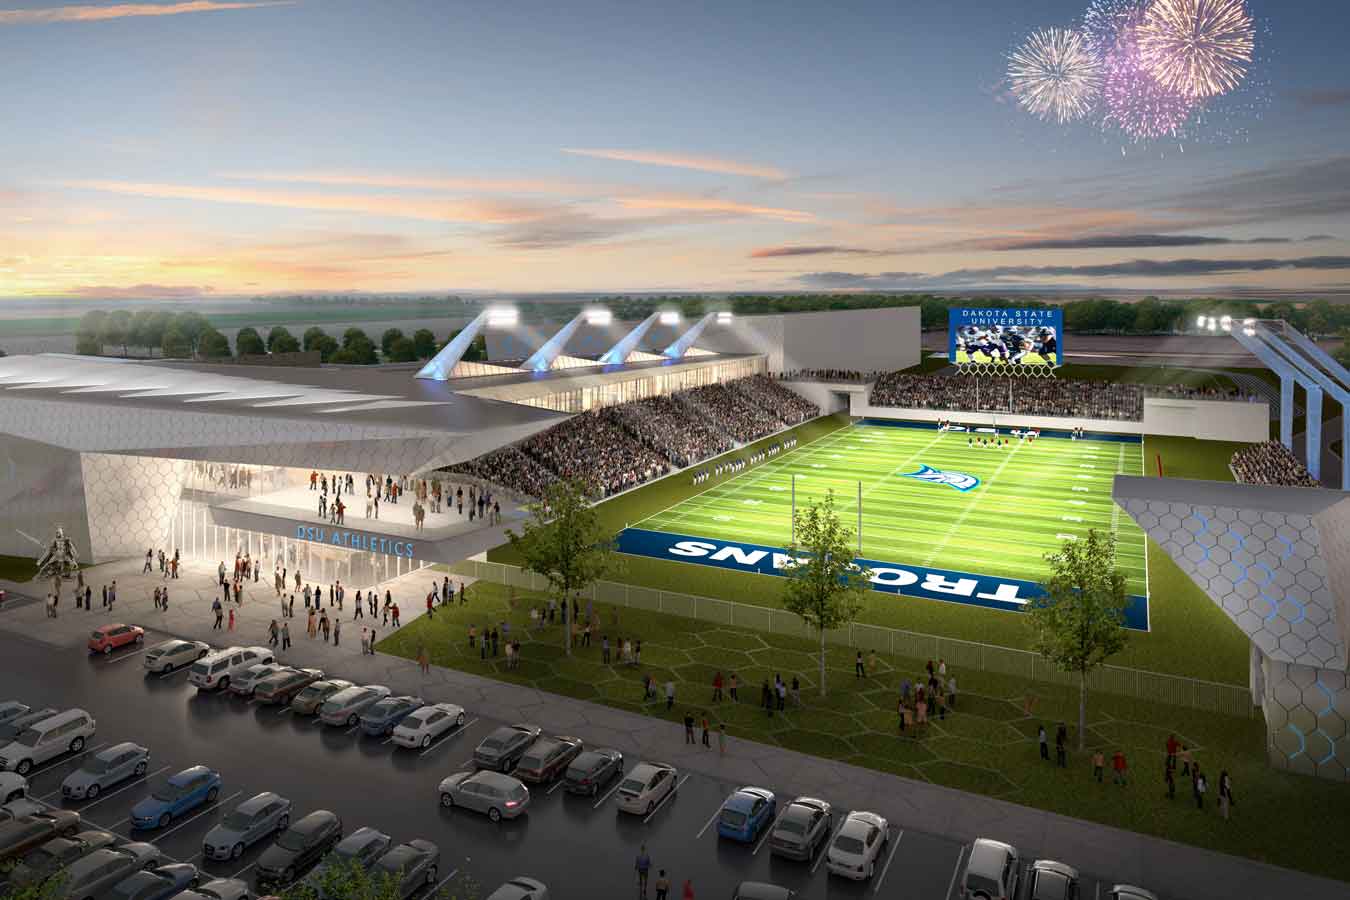 This most recent donation from Kern will help fund the multi-phase athletics complex for Dakota State. DSU is currently seeking legislative approval to build Phase I, a new athletics events center.